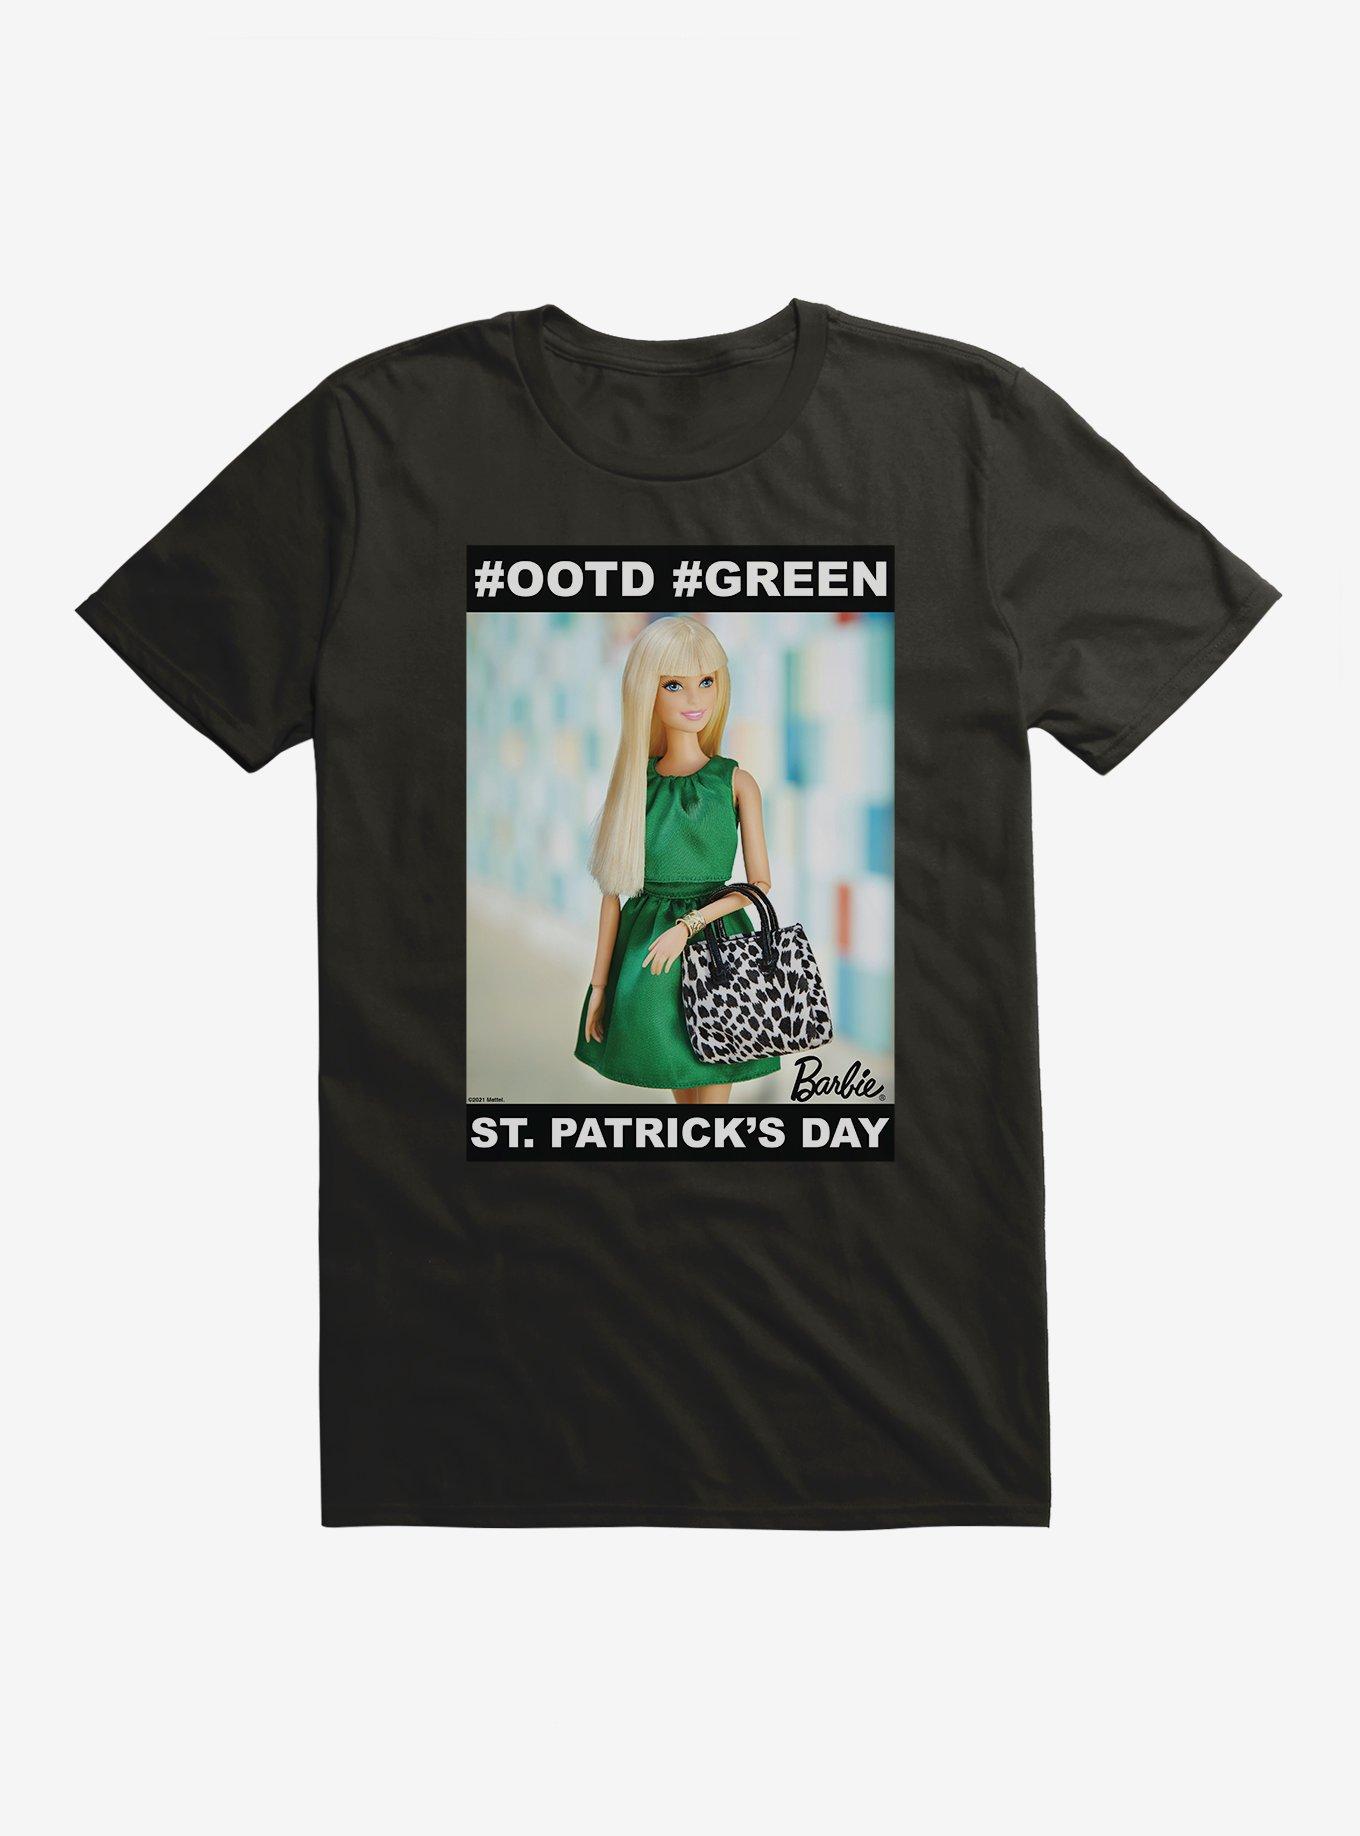 Barbie St. Patrick's Day #OOTD #GREEN T-Shirt